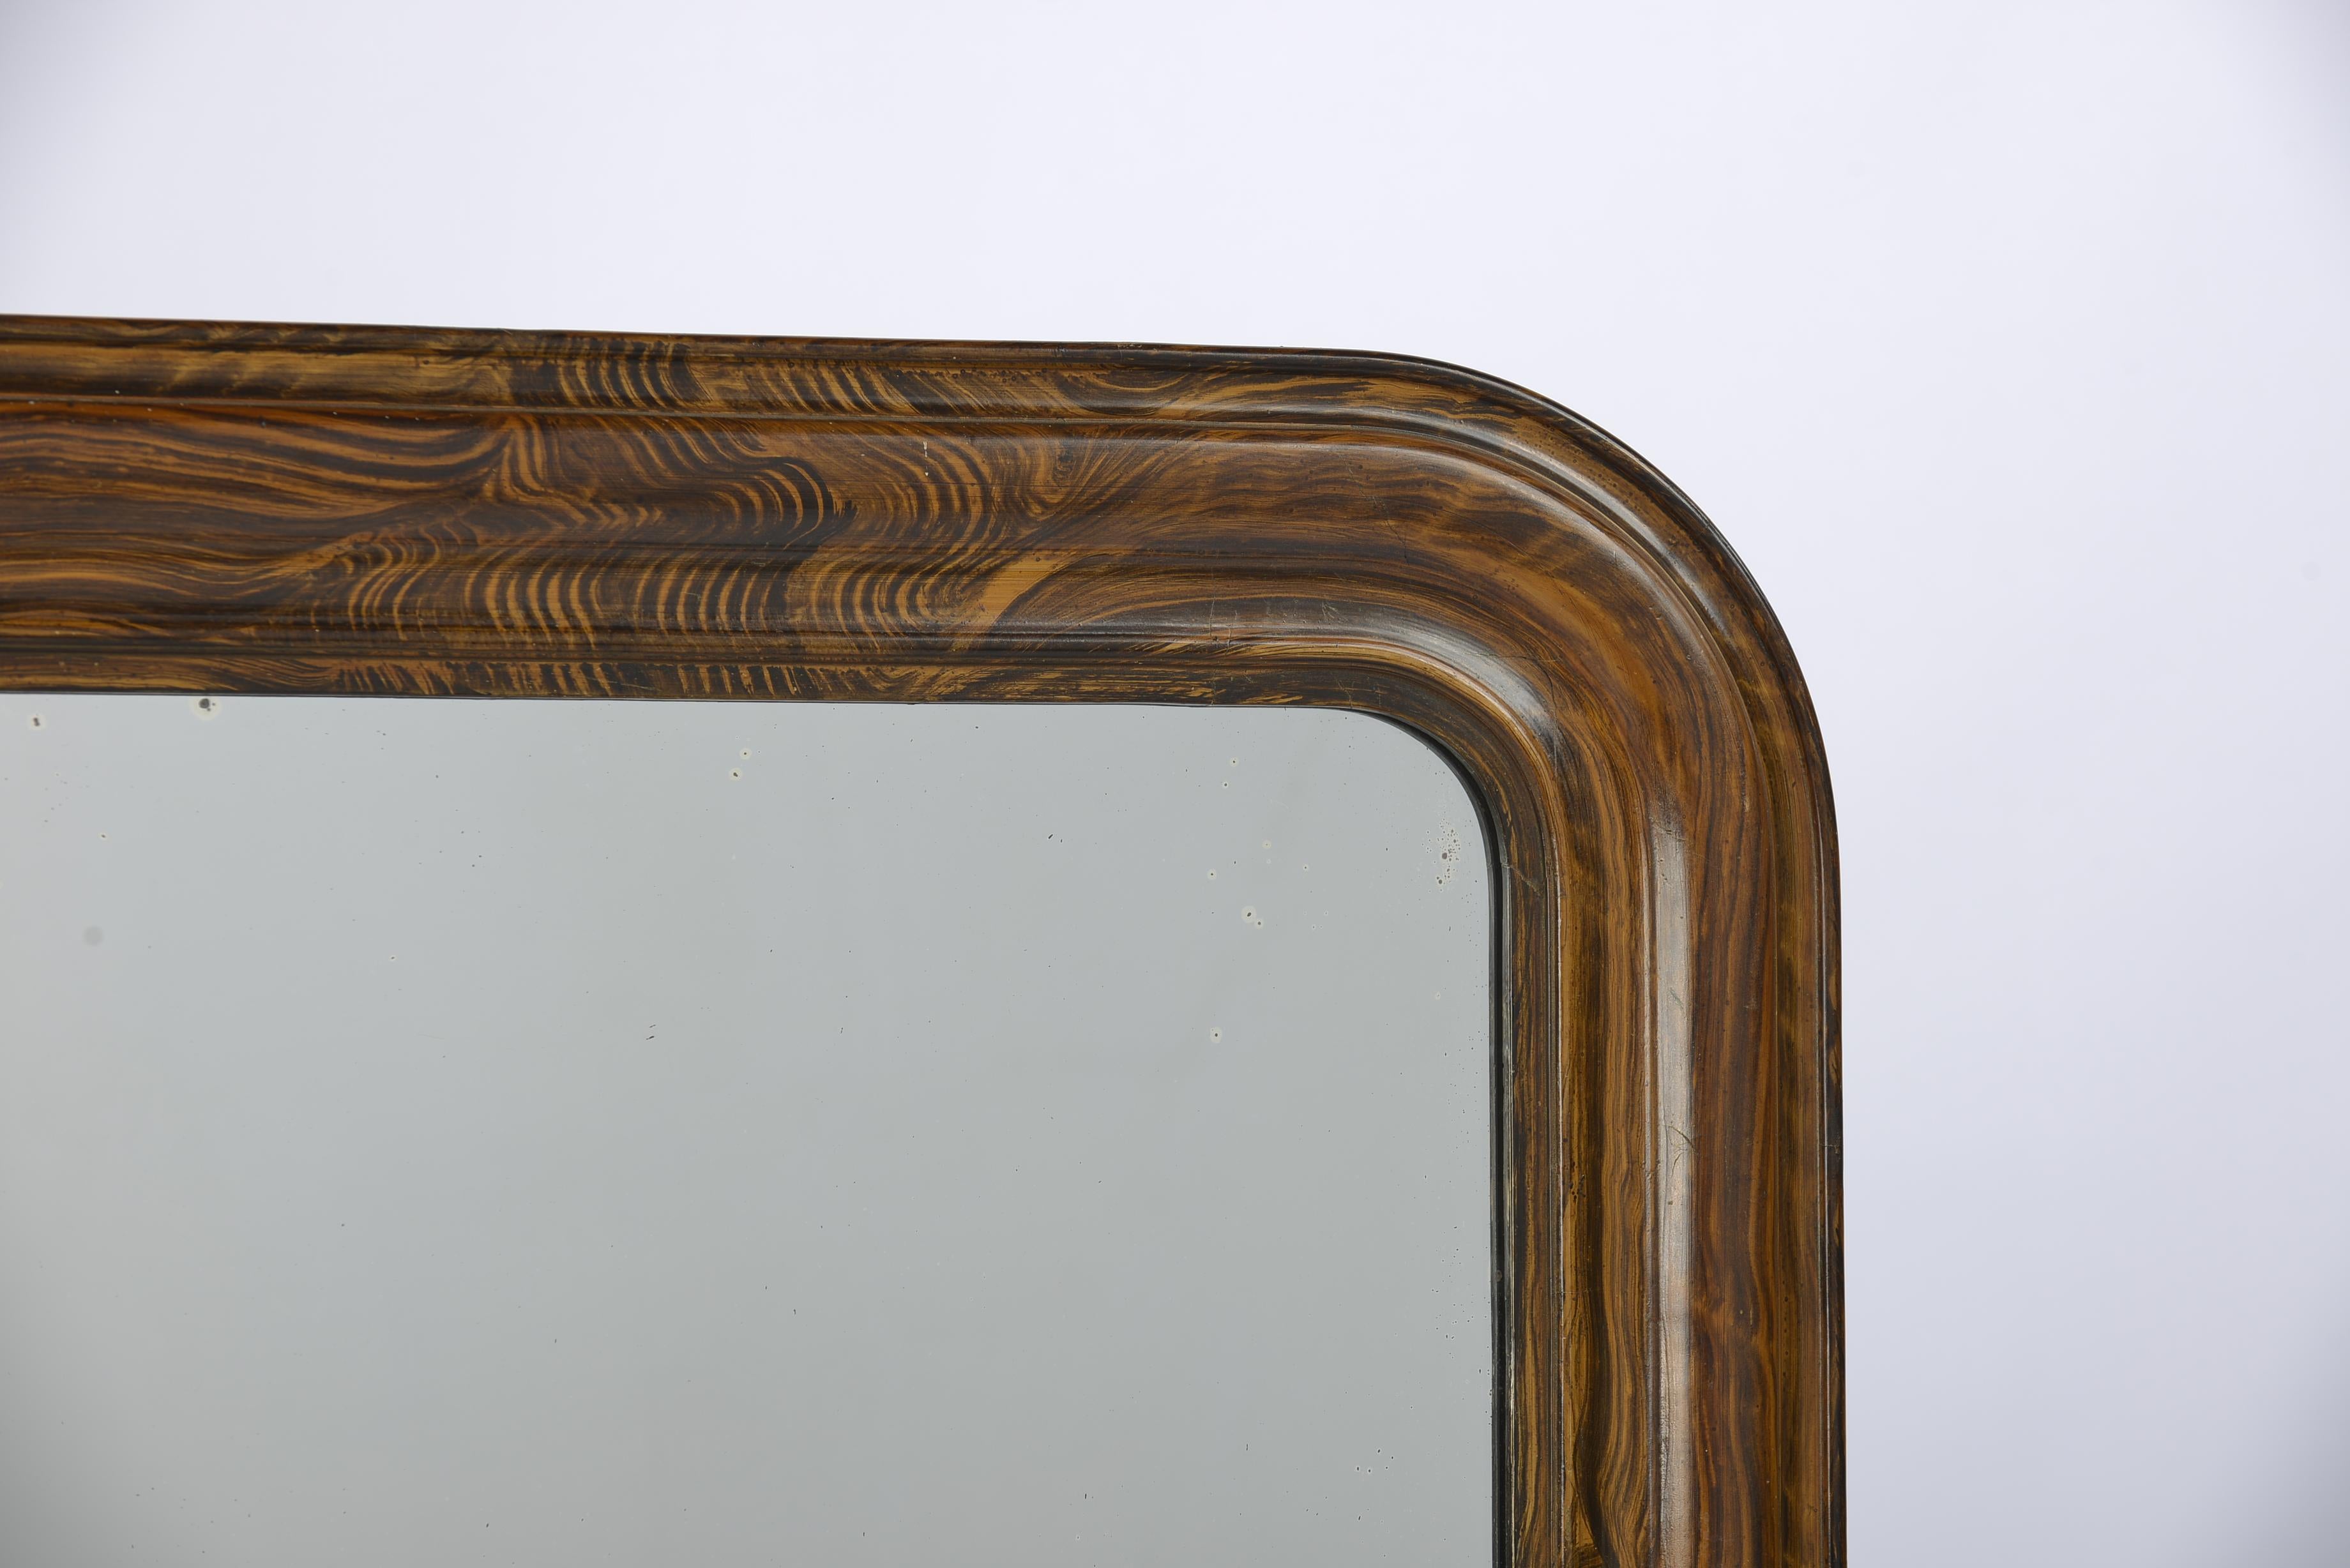 This Louis Philippe mirror was made in Northern France in the late 1800s.
The mirror has a solid pine frame that was smoothened with gesso. The mirror frame is painted to resemble rosewood with a beautiful grain pattern. The mirror has the original